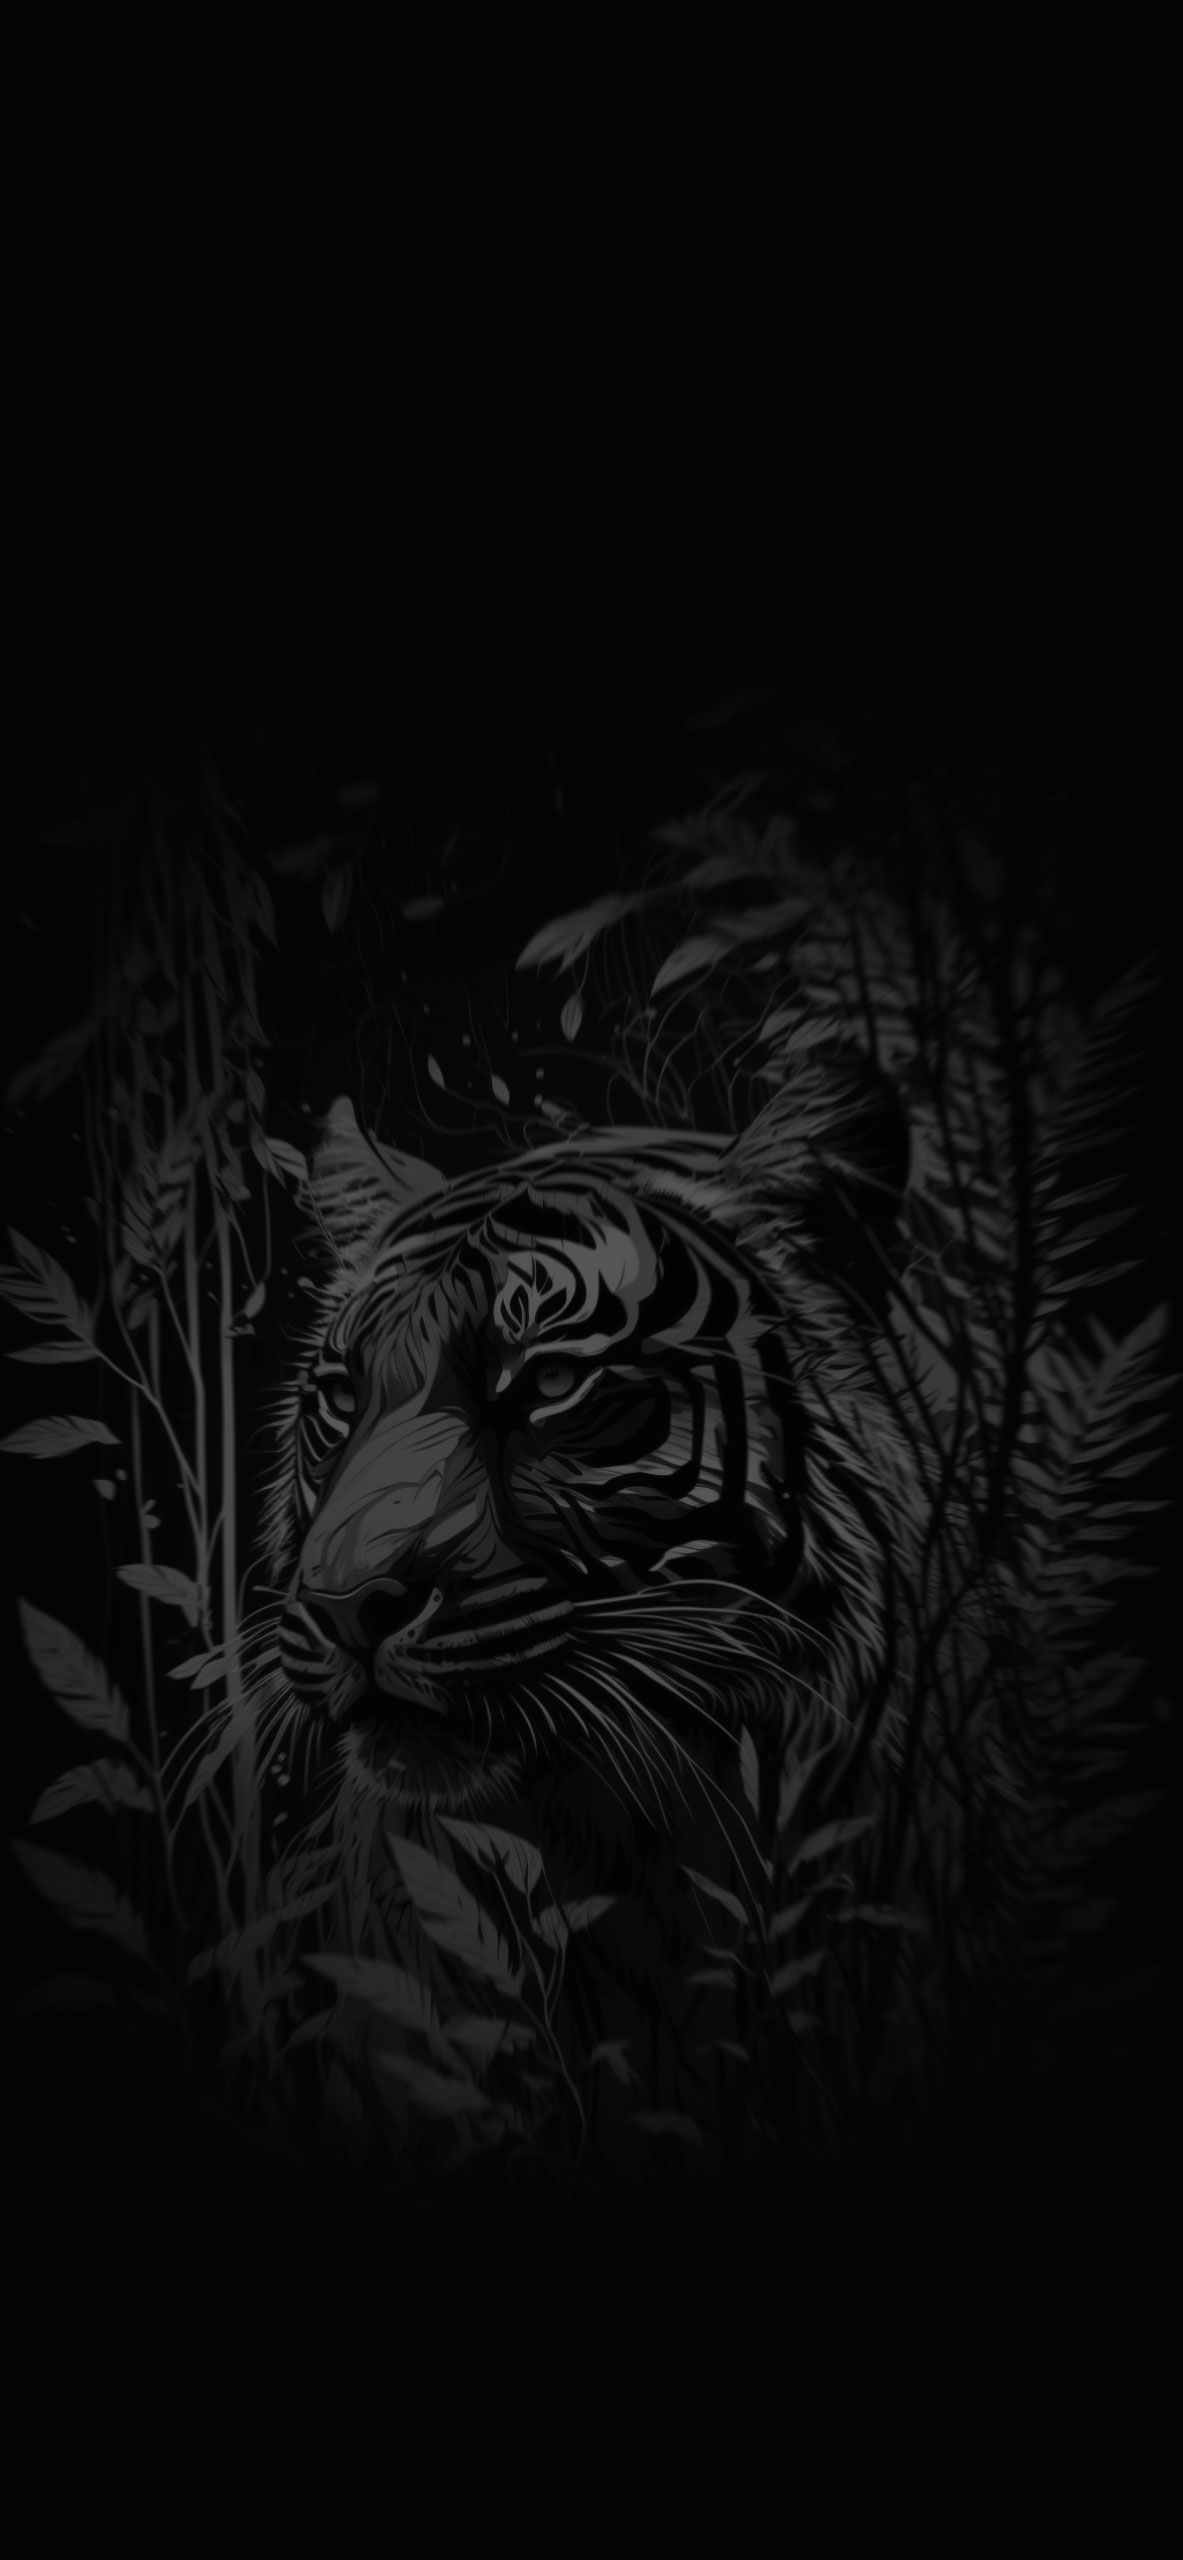 Tiger Aesthetic Black Wallpapers - Tiger Wallpaper for Phone HD